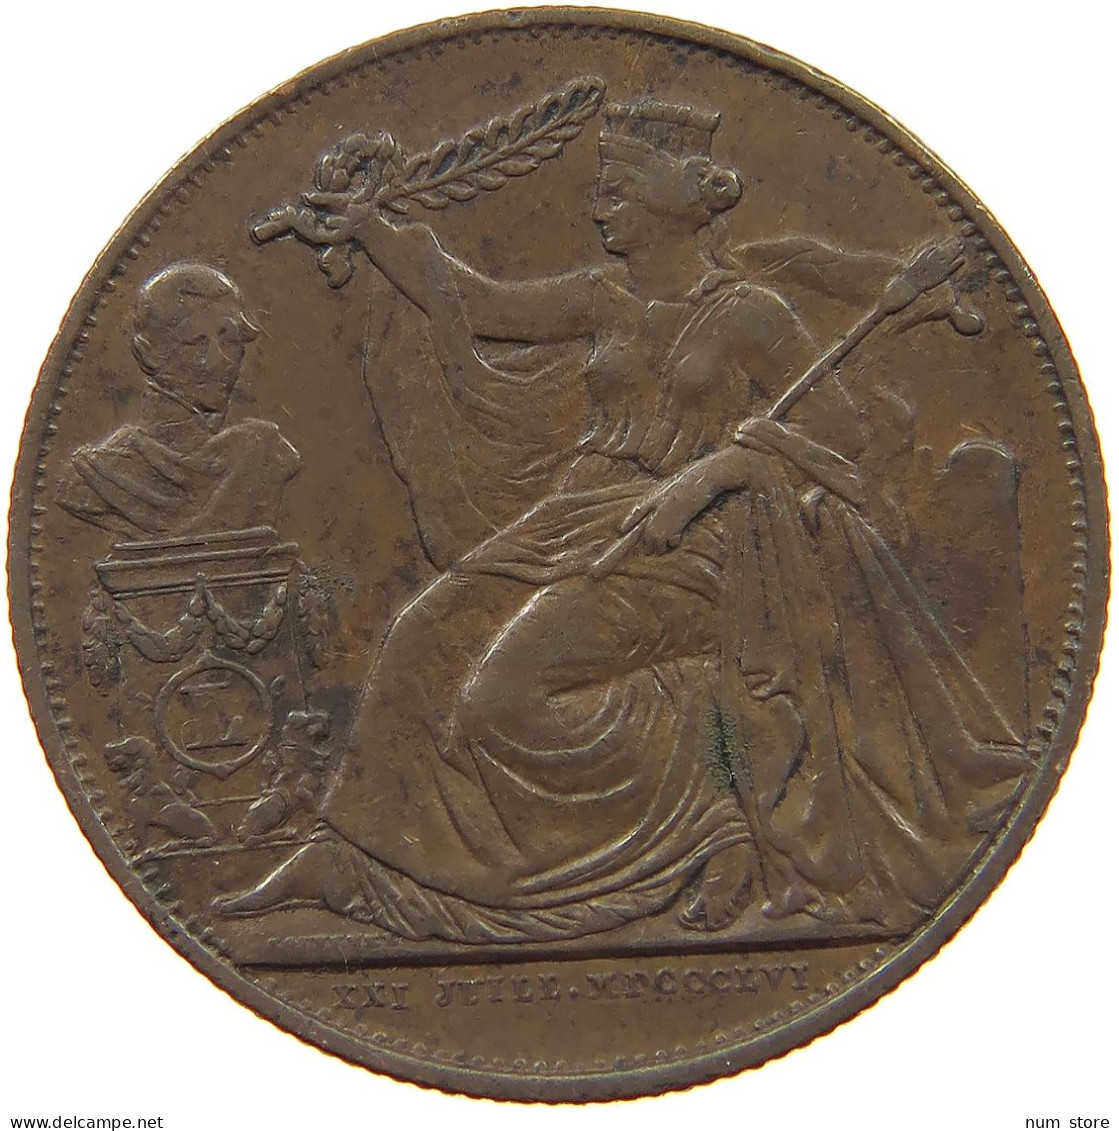 BELGIUM MEDAL 1856 Leopold I. (1831-1865) 25 ANNIVERSARY INAUGURATION #s060 0027 - Unclassified